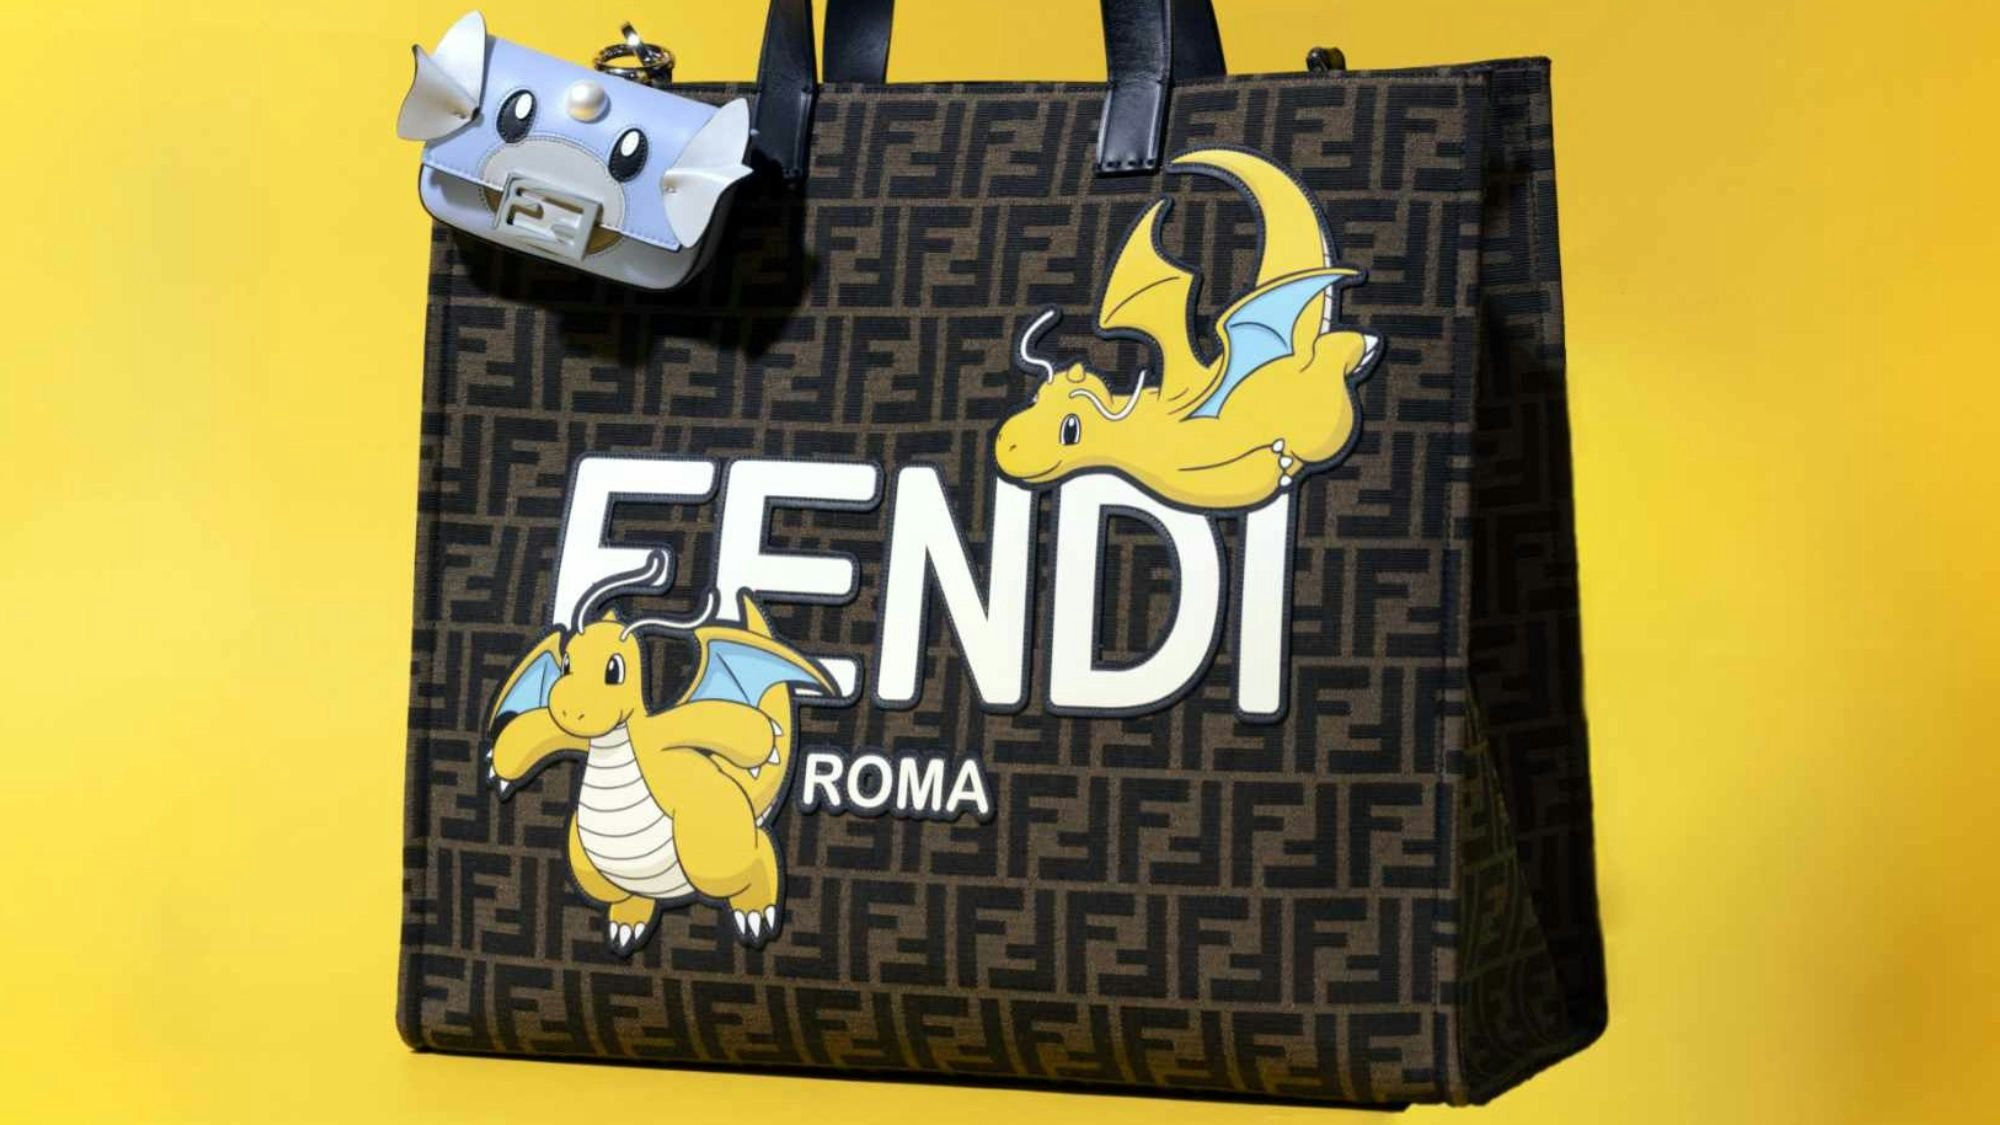 Starring Pokémon's Dragonite character, Fendi celebrates the Year of the Dragon in a playful way to connect with Asia, and Gen Z all over the world. Photo: Fendi/Fragment Design/Pokémon